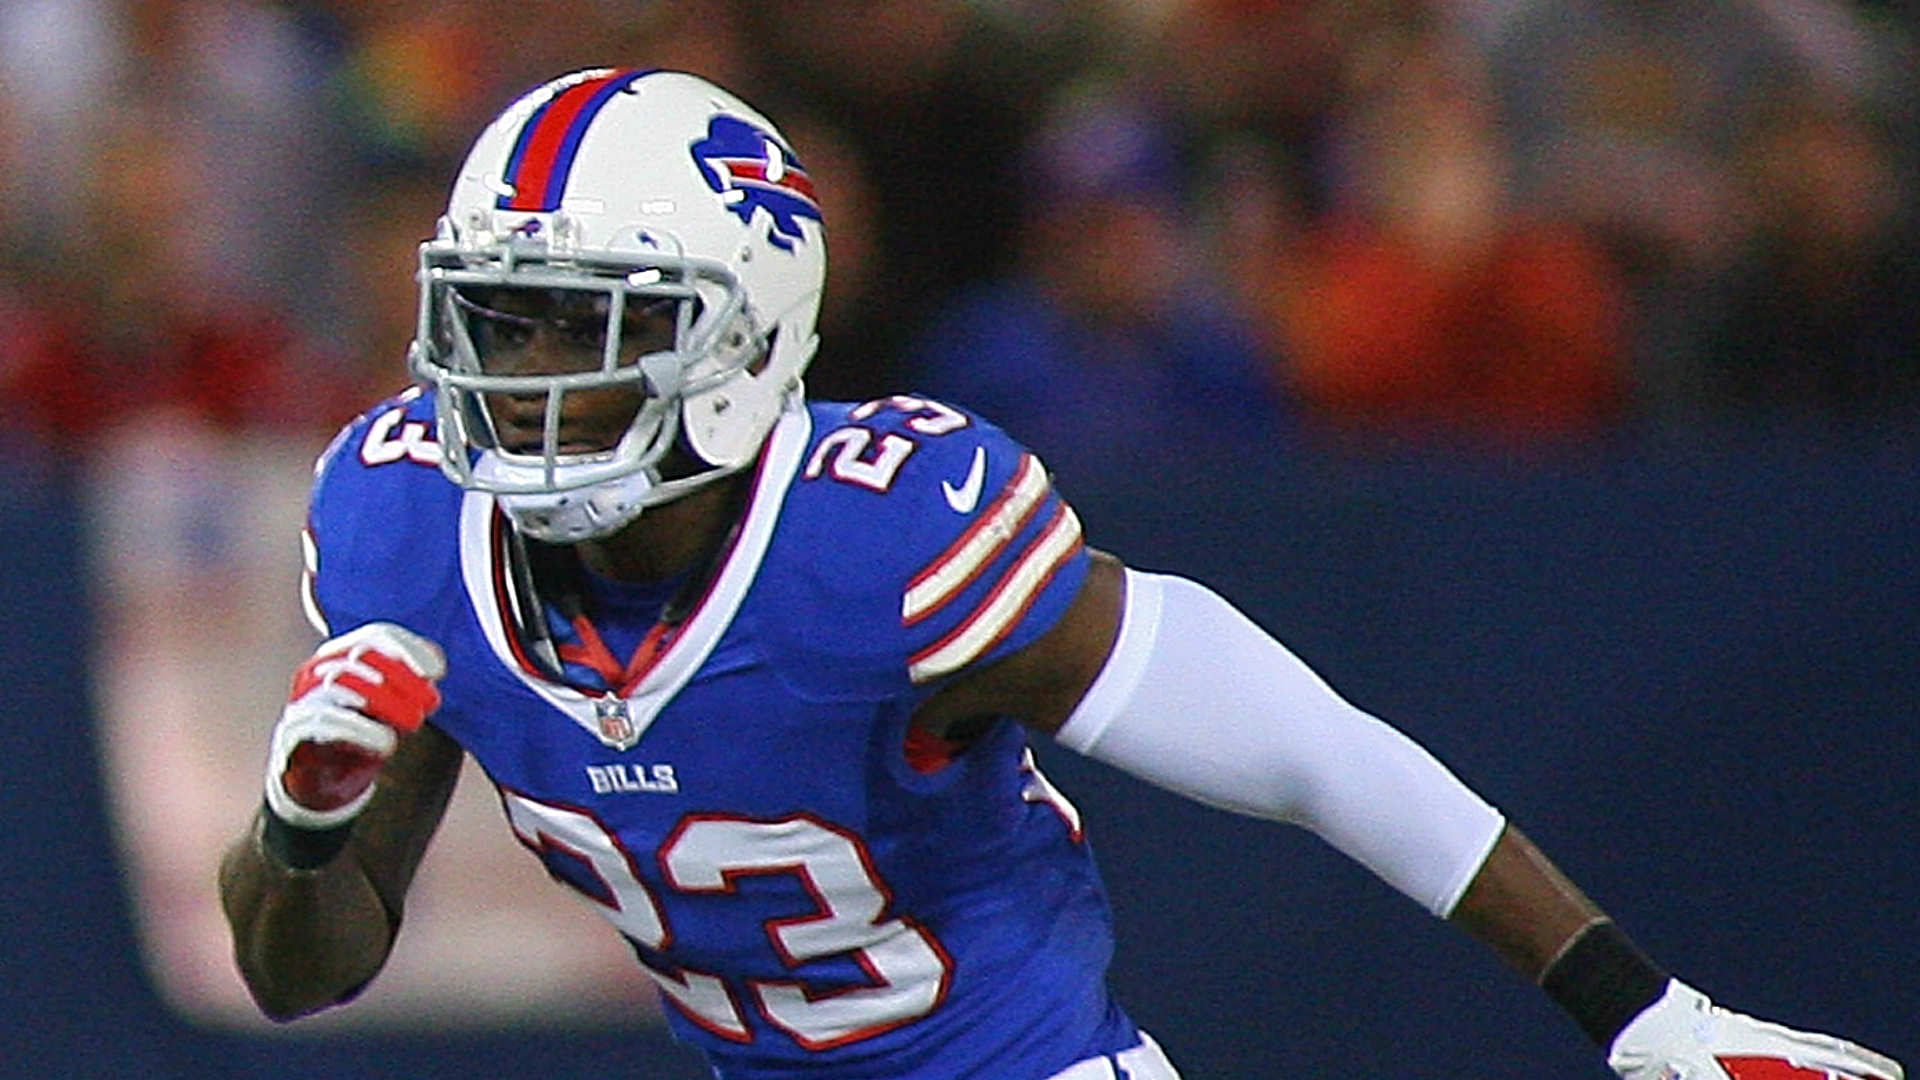 Former Bills safety Aaron Williams retiring due to injuries